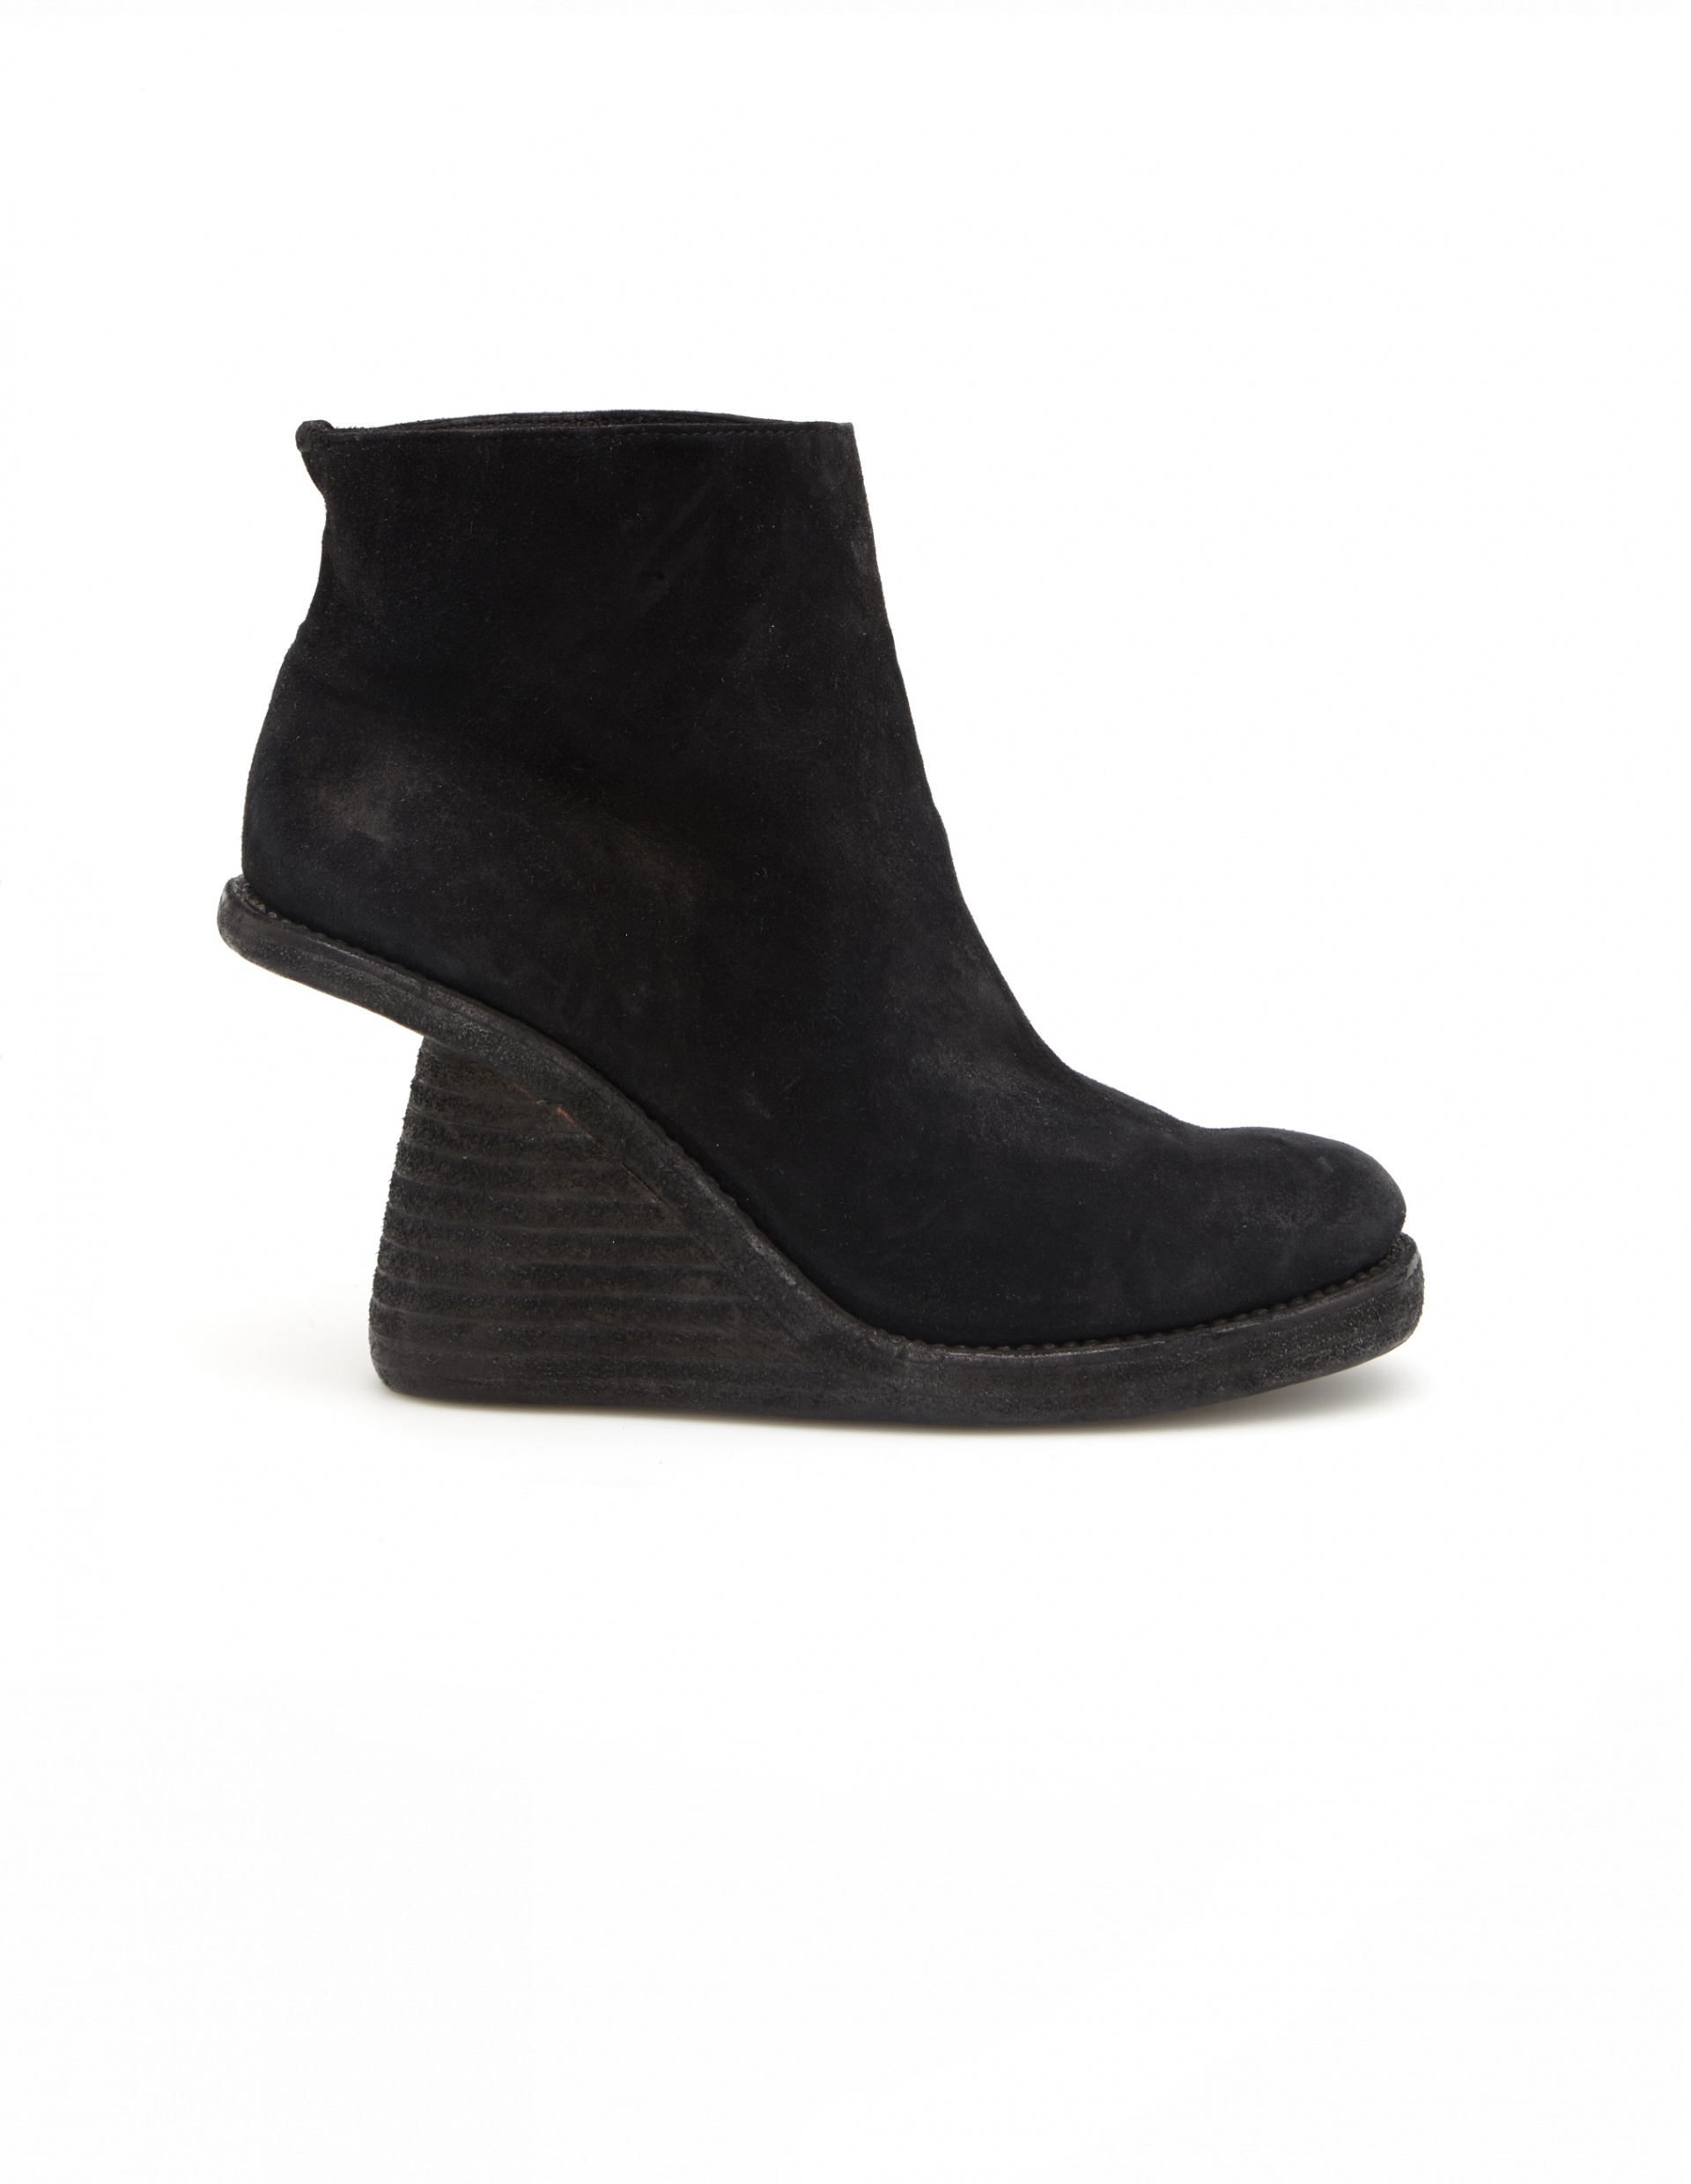 WEDGE HEEL SUEDE ANKLE BOOTS - 1